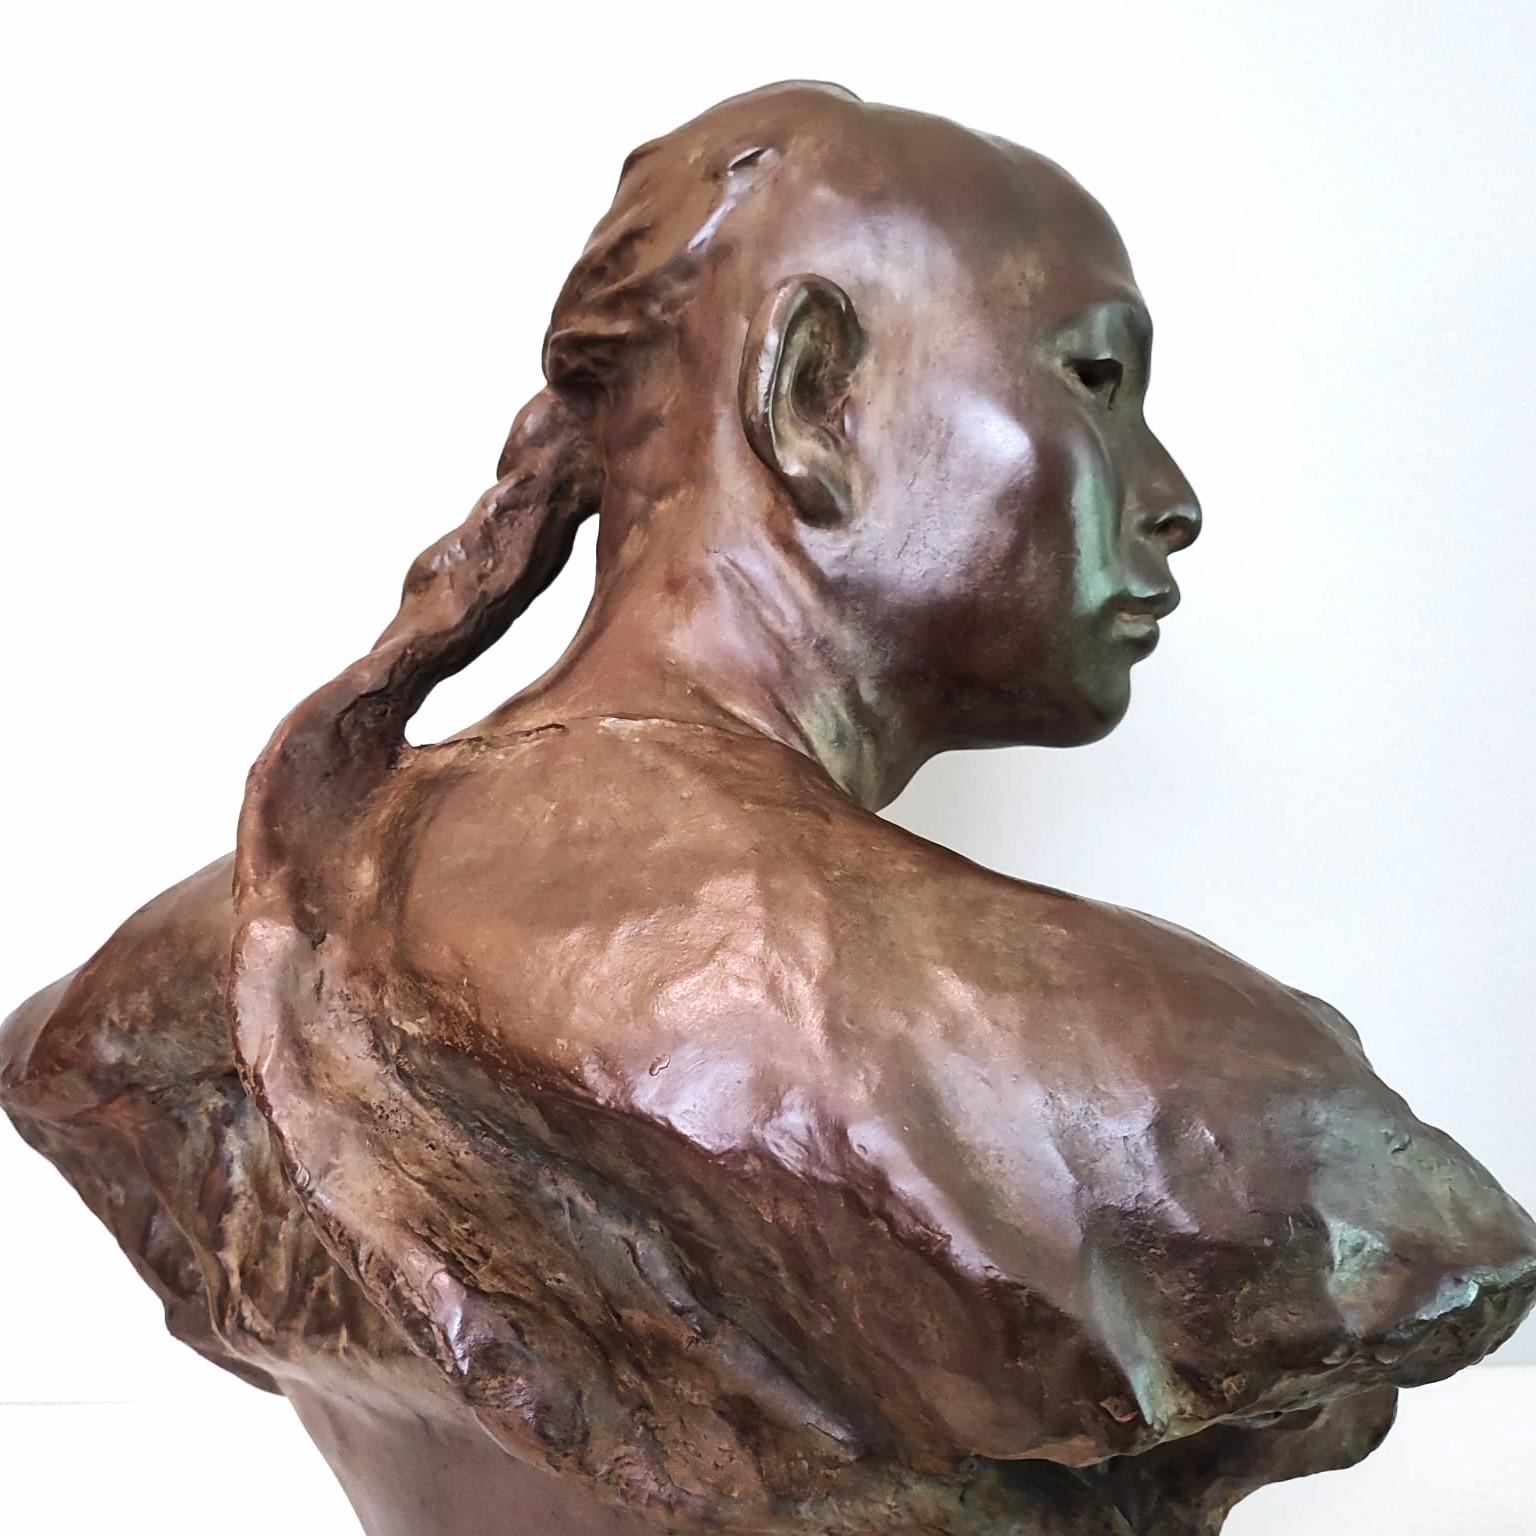 JEAN-BAPTISTE CARPEAUX 1827 - 1875
Le Chinois N°1 (study for Asia) (1868). Model from the observatory fountain. Sketch
Height ca.60 cm

A similar copy auctioned on June 22, 2023, at Bonhams (Alain Delon: 60 Years of Passion) with an estimate of